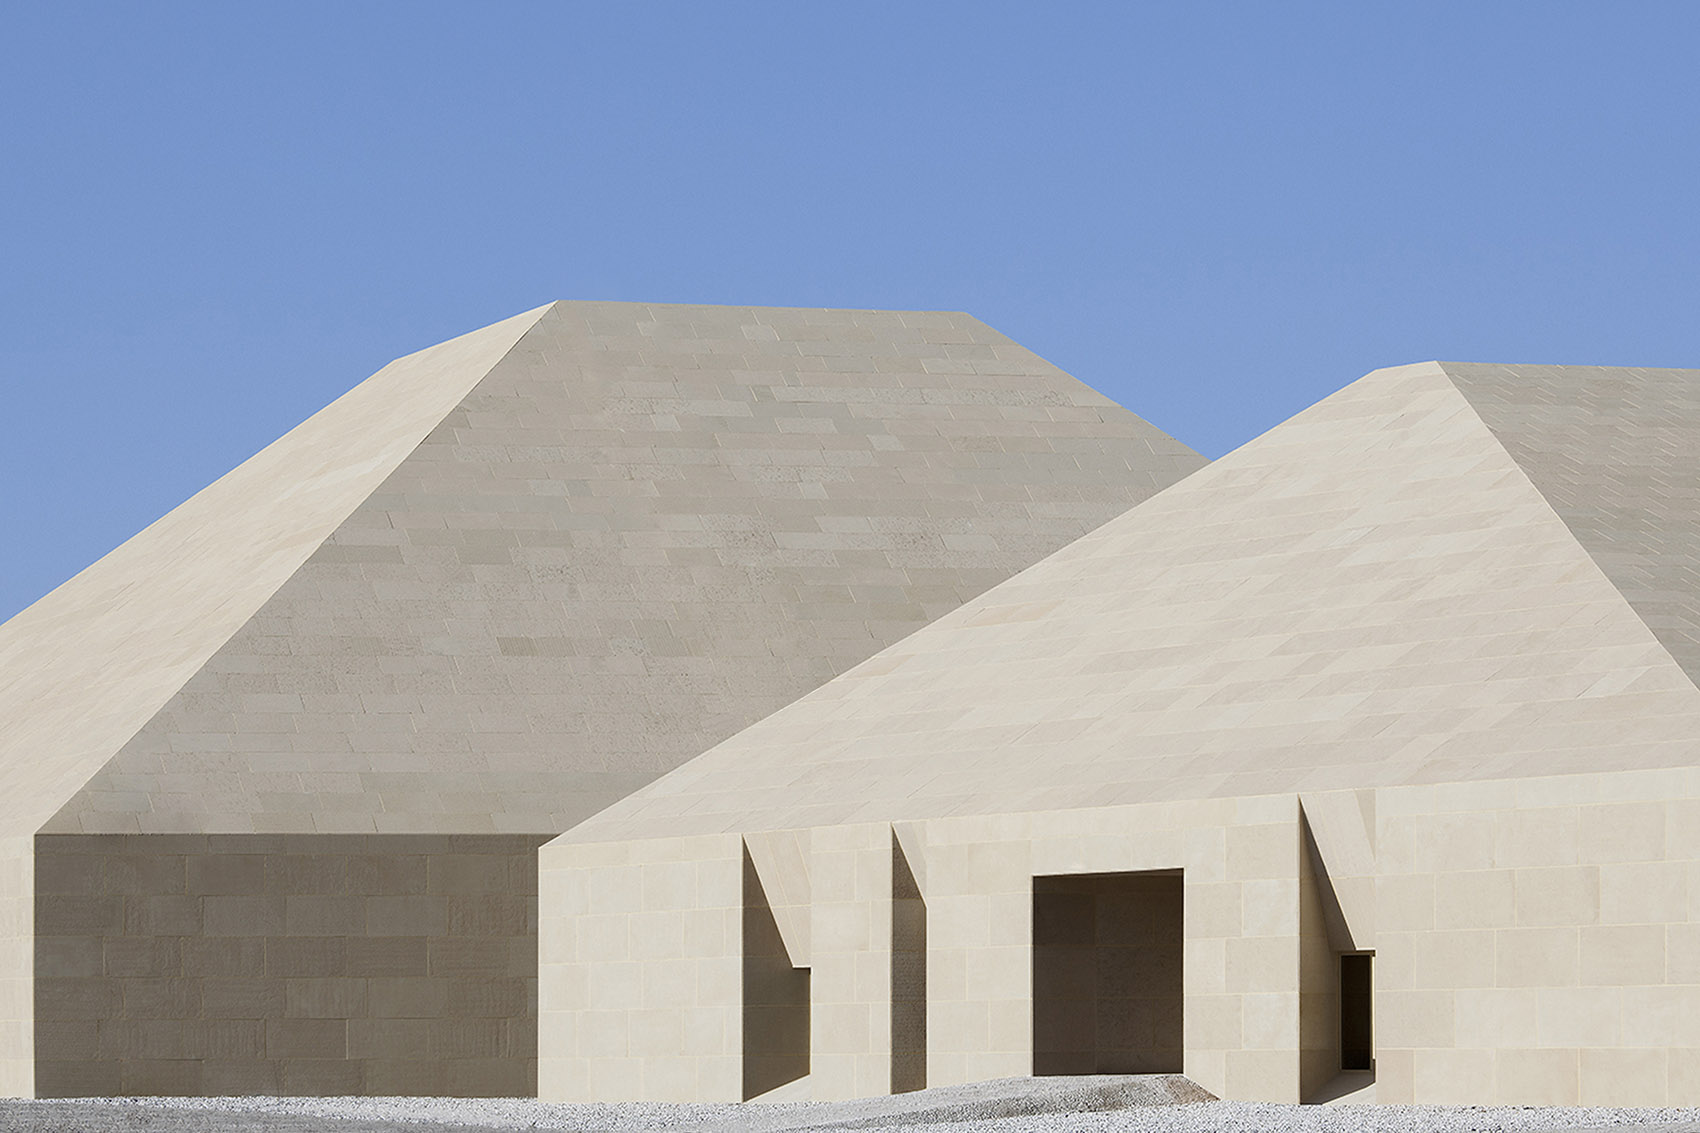 010-dunhuang-tourism-distributing-center-china-by-biad-zxd-architects.jpg